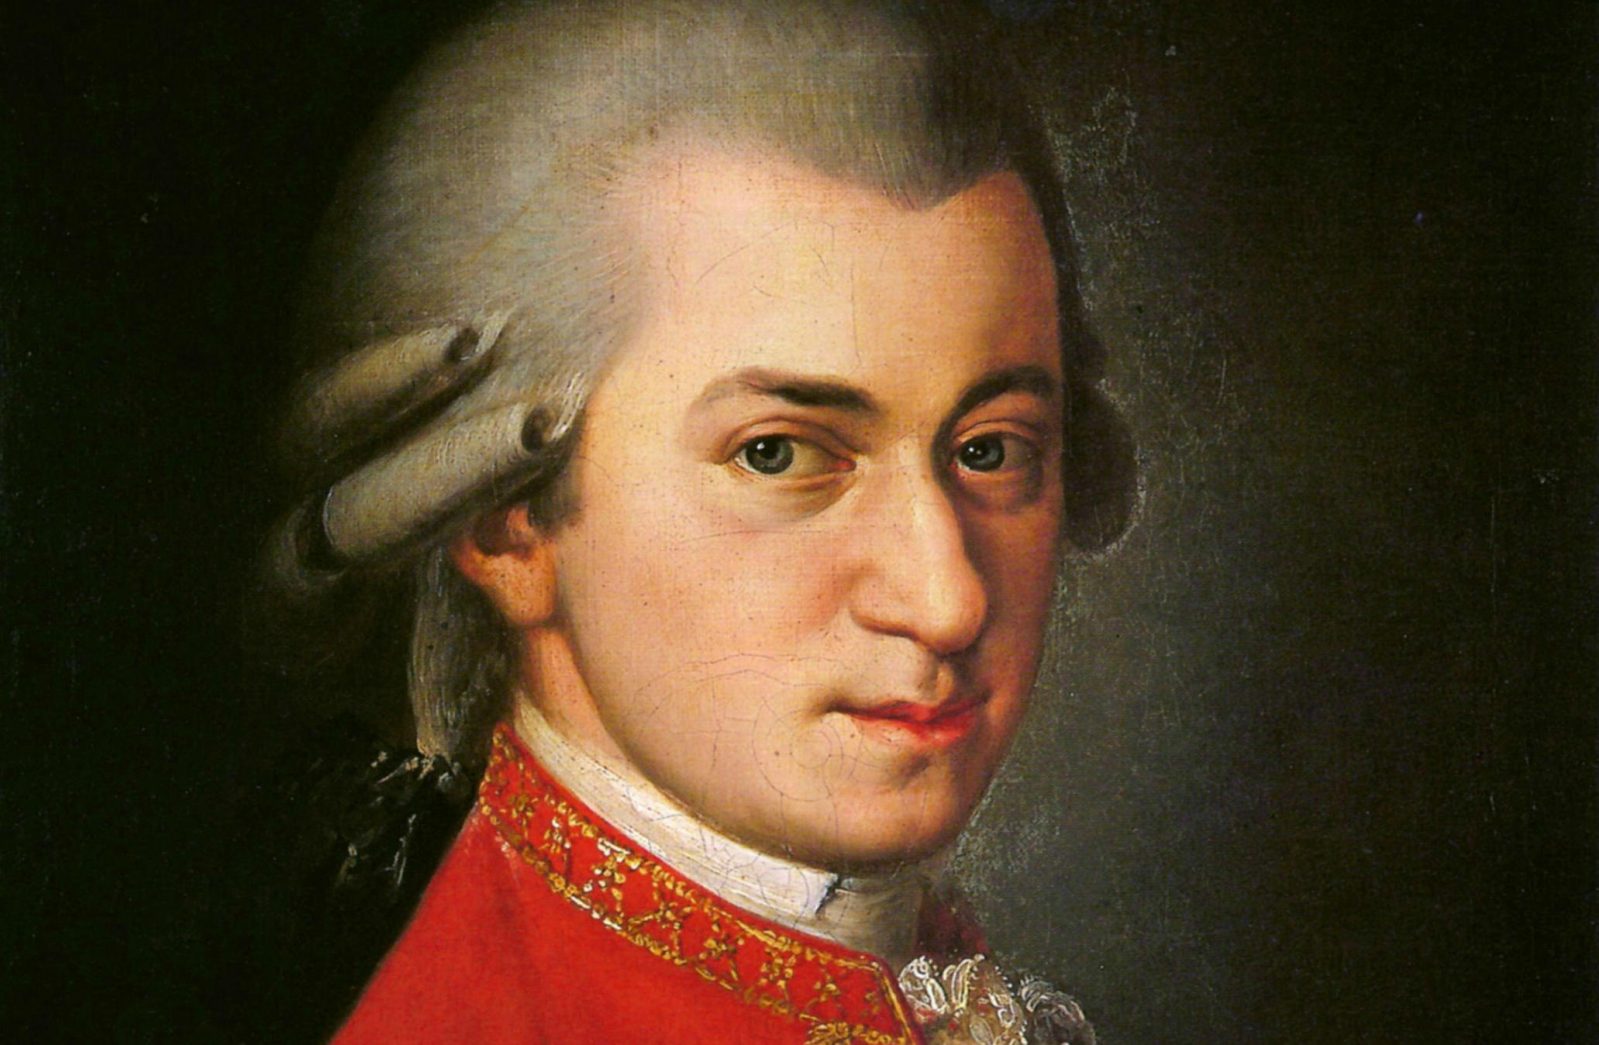 I’m Sorry, But You’ll Be Able to Pass This Trivia Test Only If You’re the Smart Friend Wolfgang Amadeus Mozart